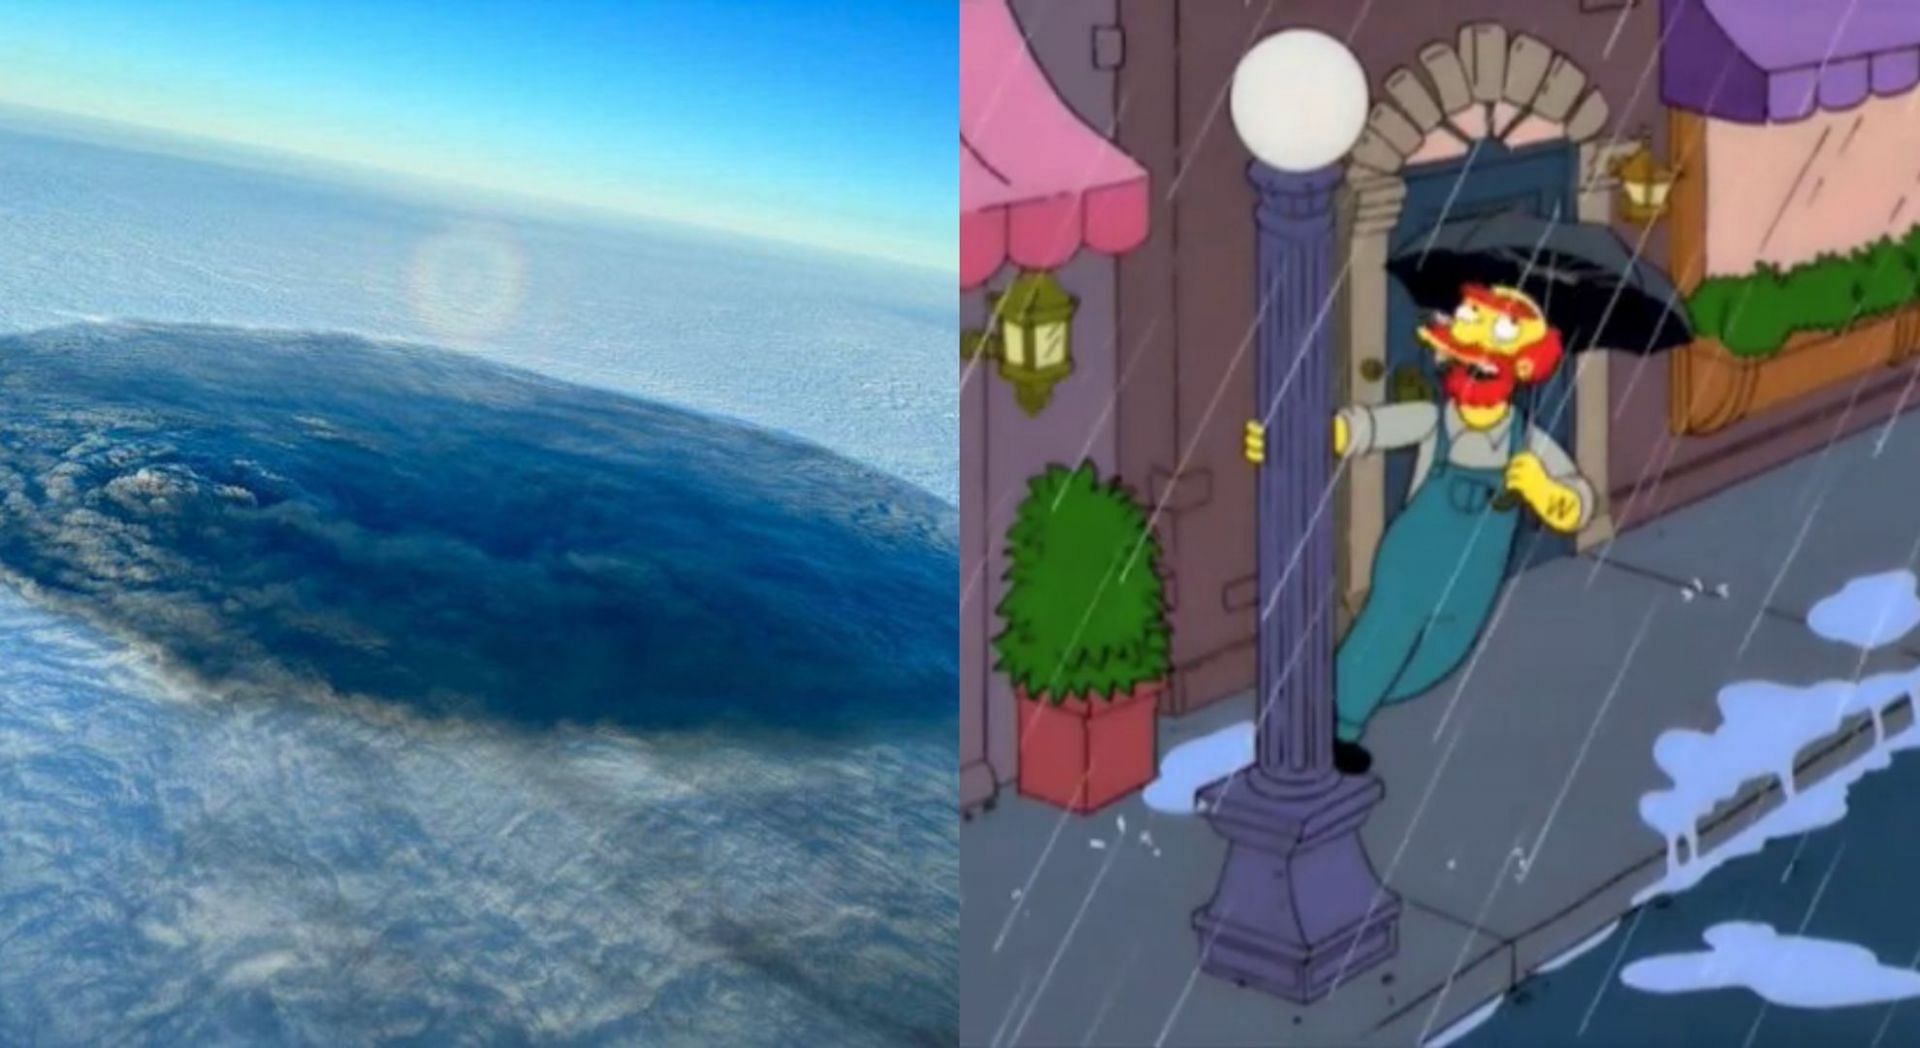 The Simpsons acid rain episode went viral amid Ohio chemical cloud claim (Image via @/SNAFUradio2/Twitter and YouTube)